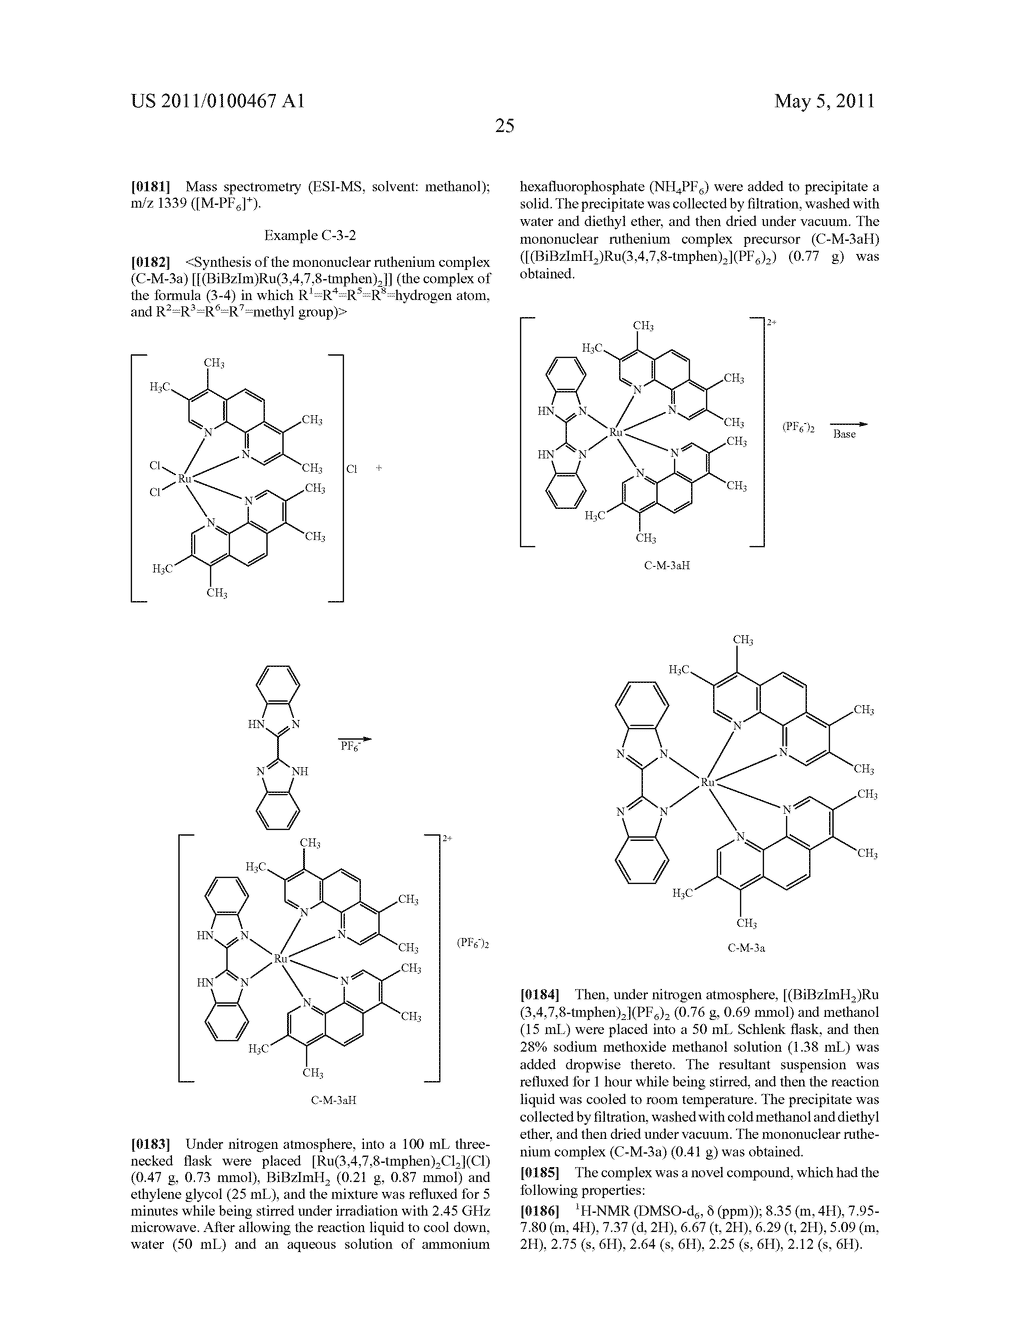 BINUCLEAR RUTHENIUM COMPLEX DYE, RUTHENIUM-OSMIUM COMPLEX DYE, PHOTOELECTRIC CONVERSION ELEMENT USING ANY ONE OF THE COMPLEX DYES, AND PHOTOCHEMICAL CELL - diagram, schematic, and image 30